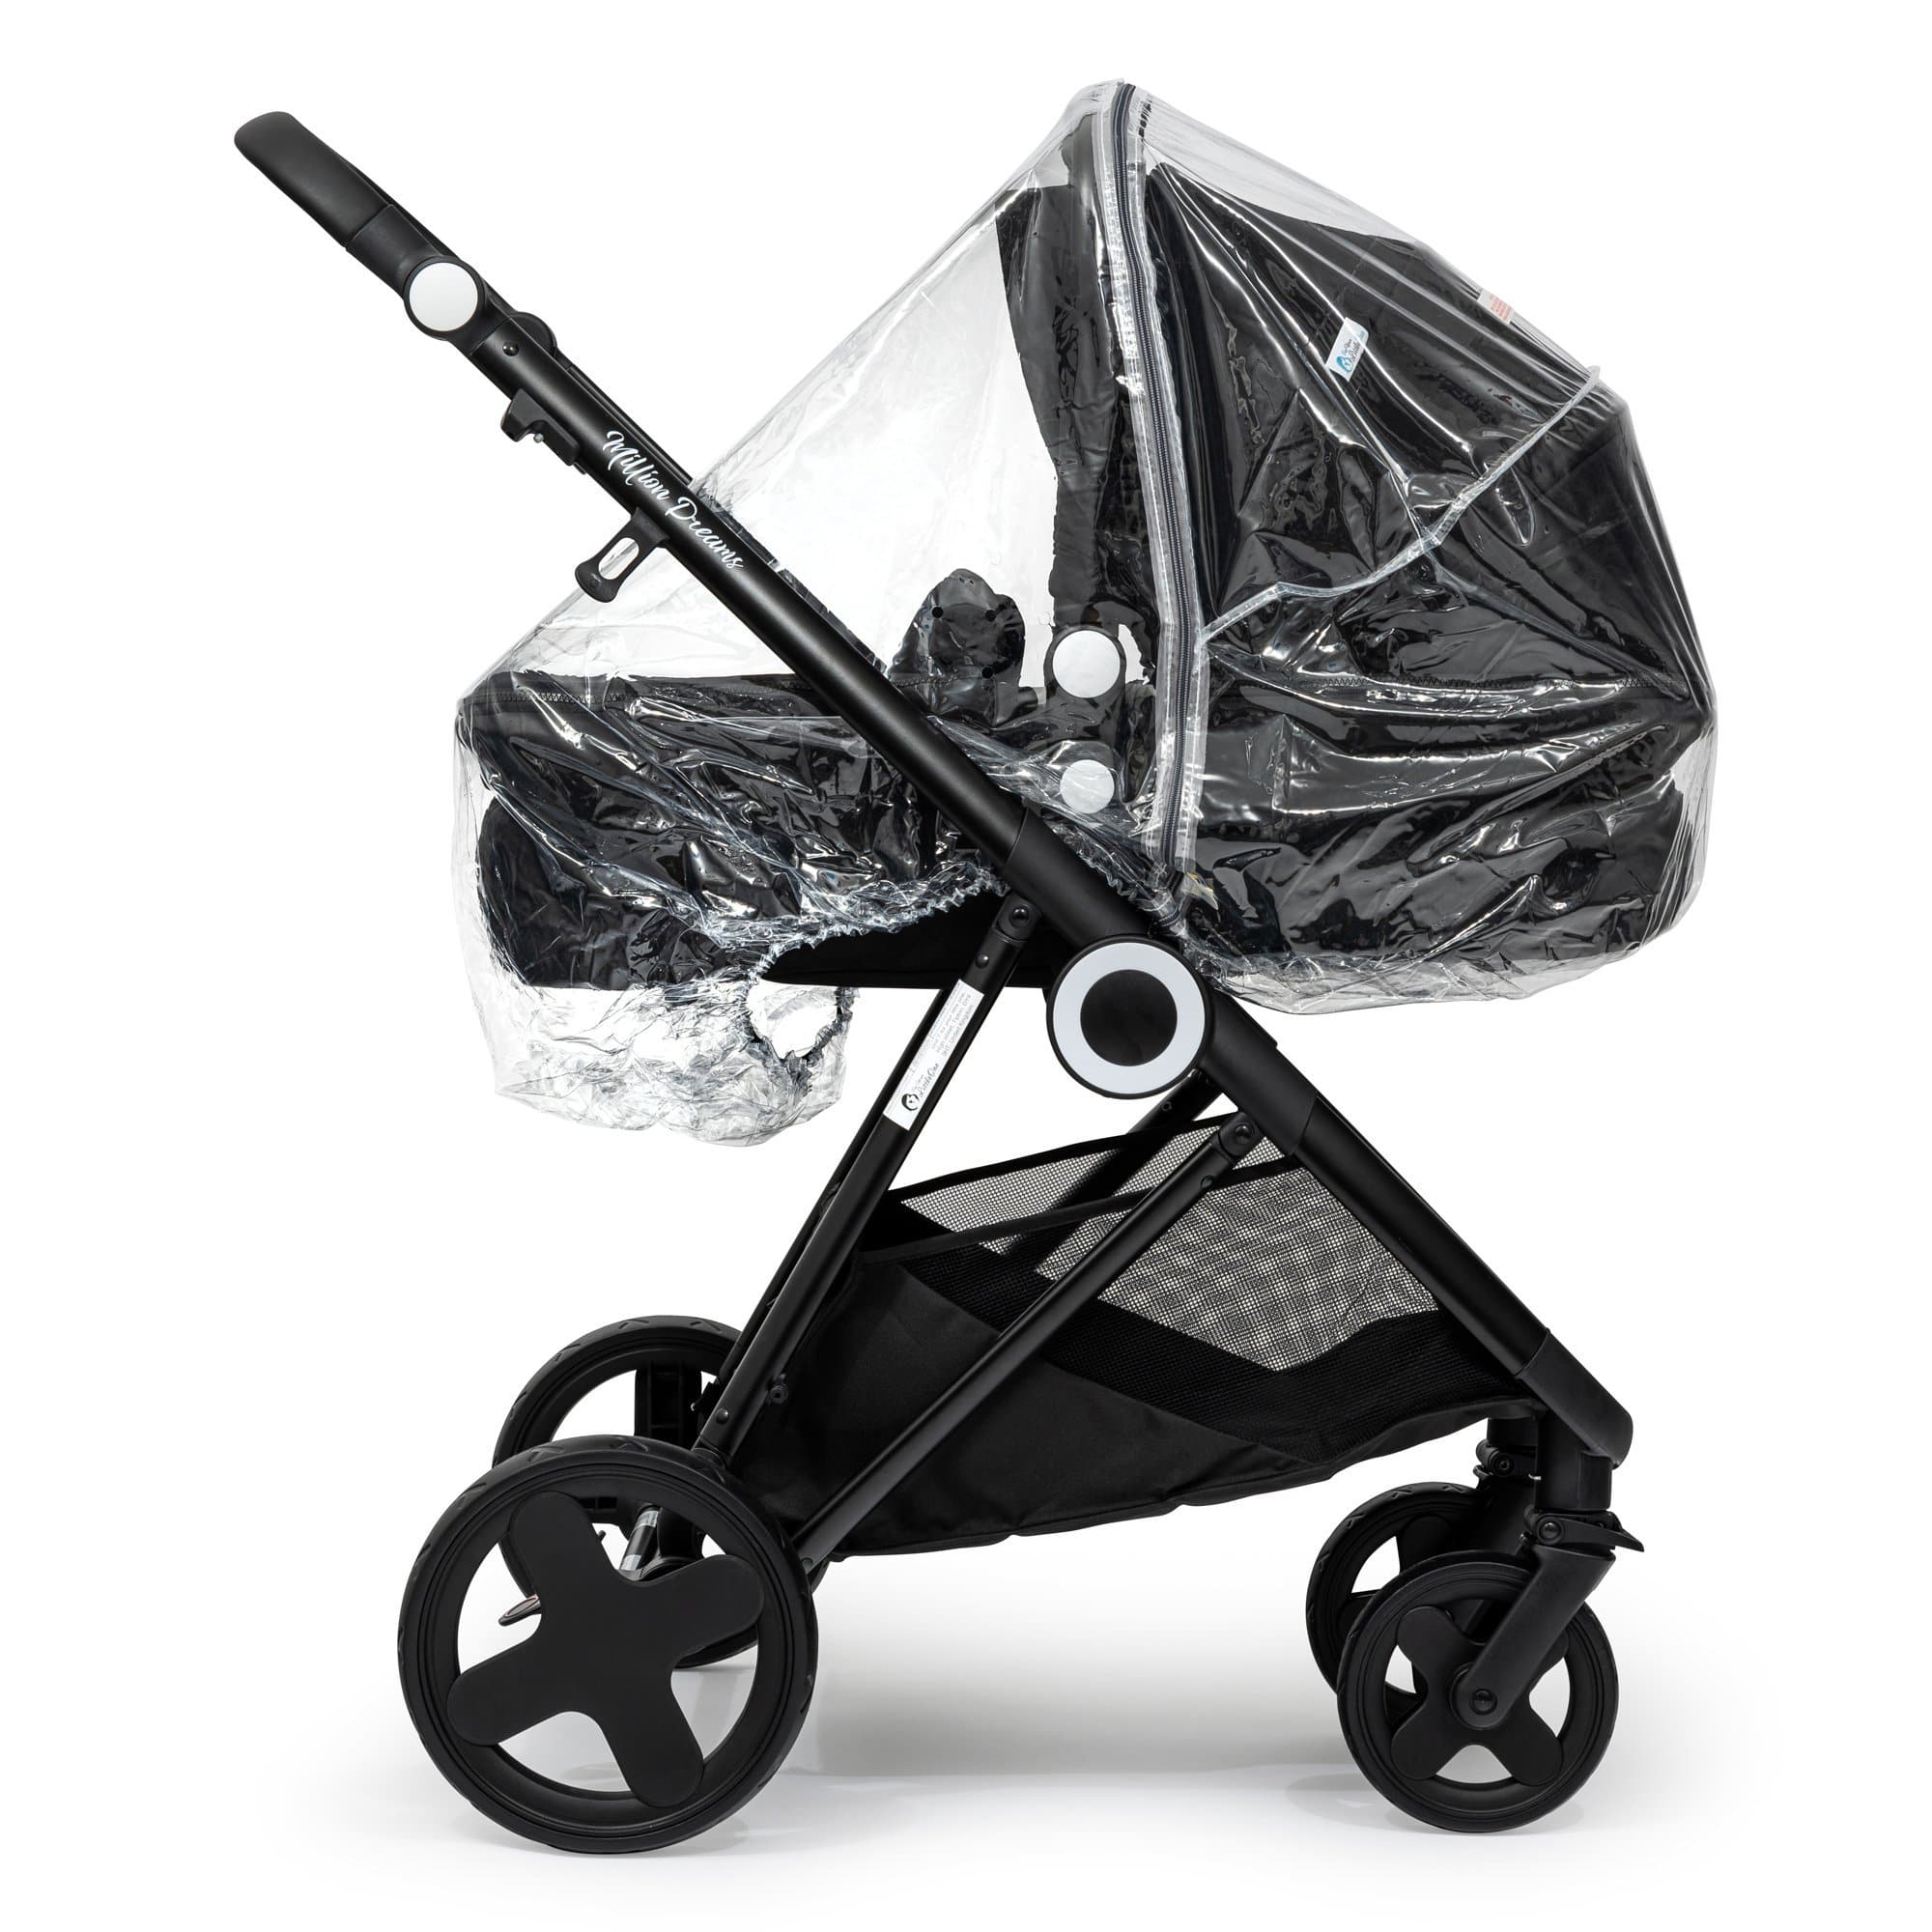 2 in 1 Rain Cover Compatible with Cybex - Fits All Models - For Your Little One